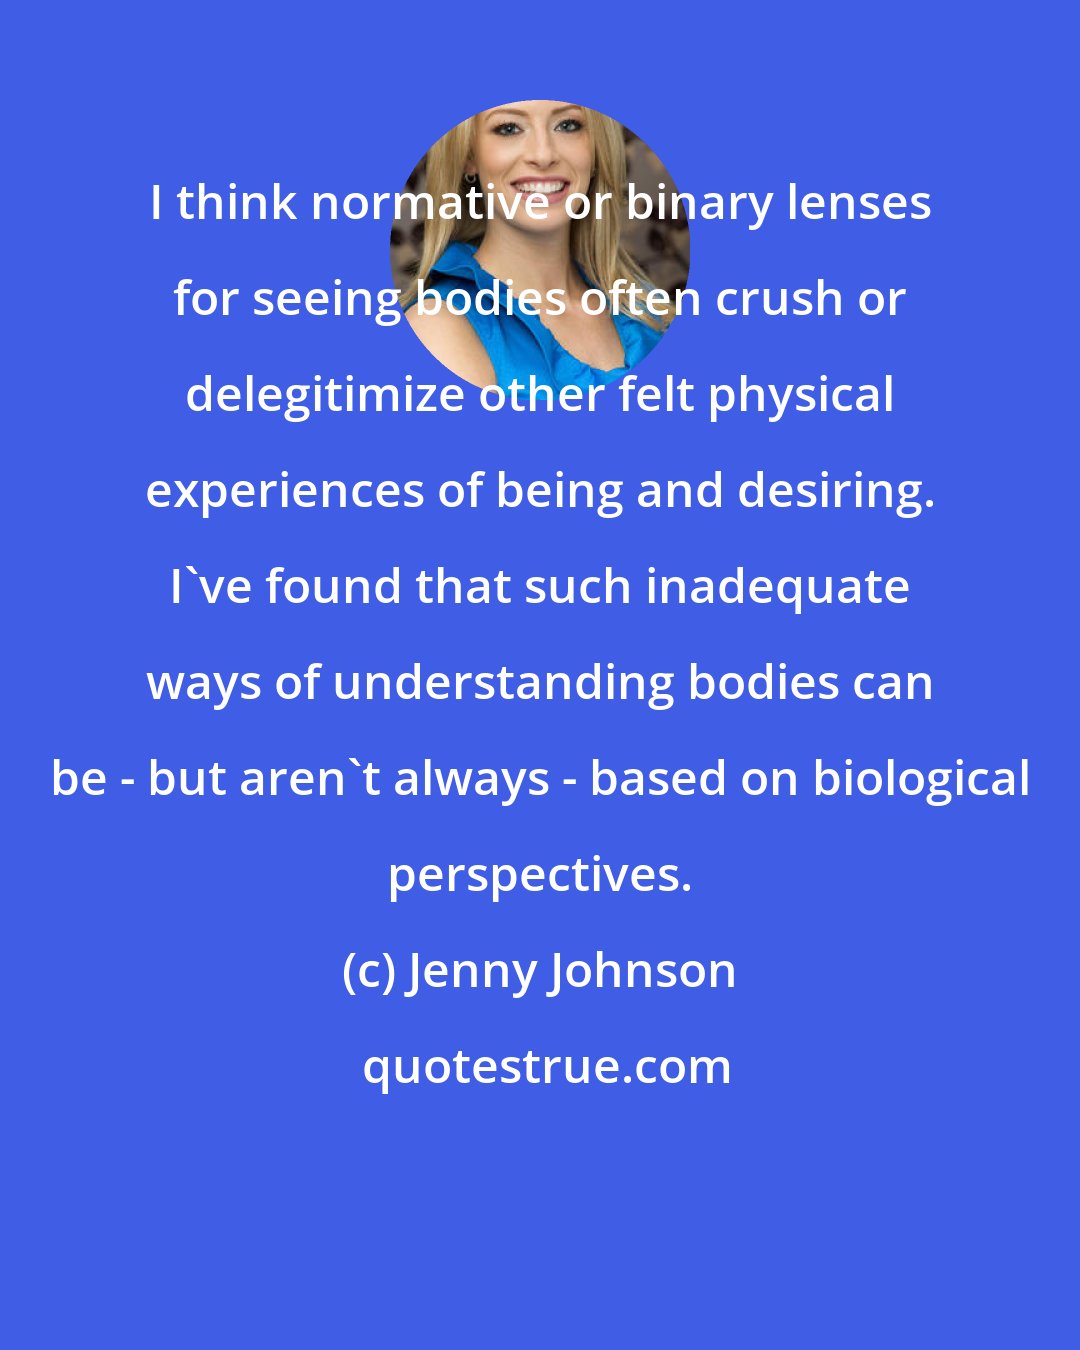 Jenny Johnson: I think normative or binary lenses for seeing bodies often crush or delegitimize other felt physical experiences of being and desiring. I've found that such inadequate ways of understanding bodies can be - but aren't always - based on biological perspectives.